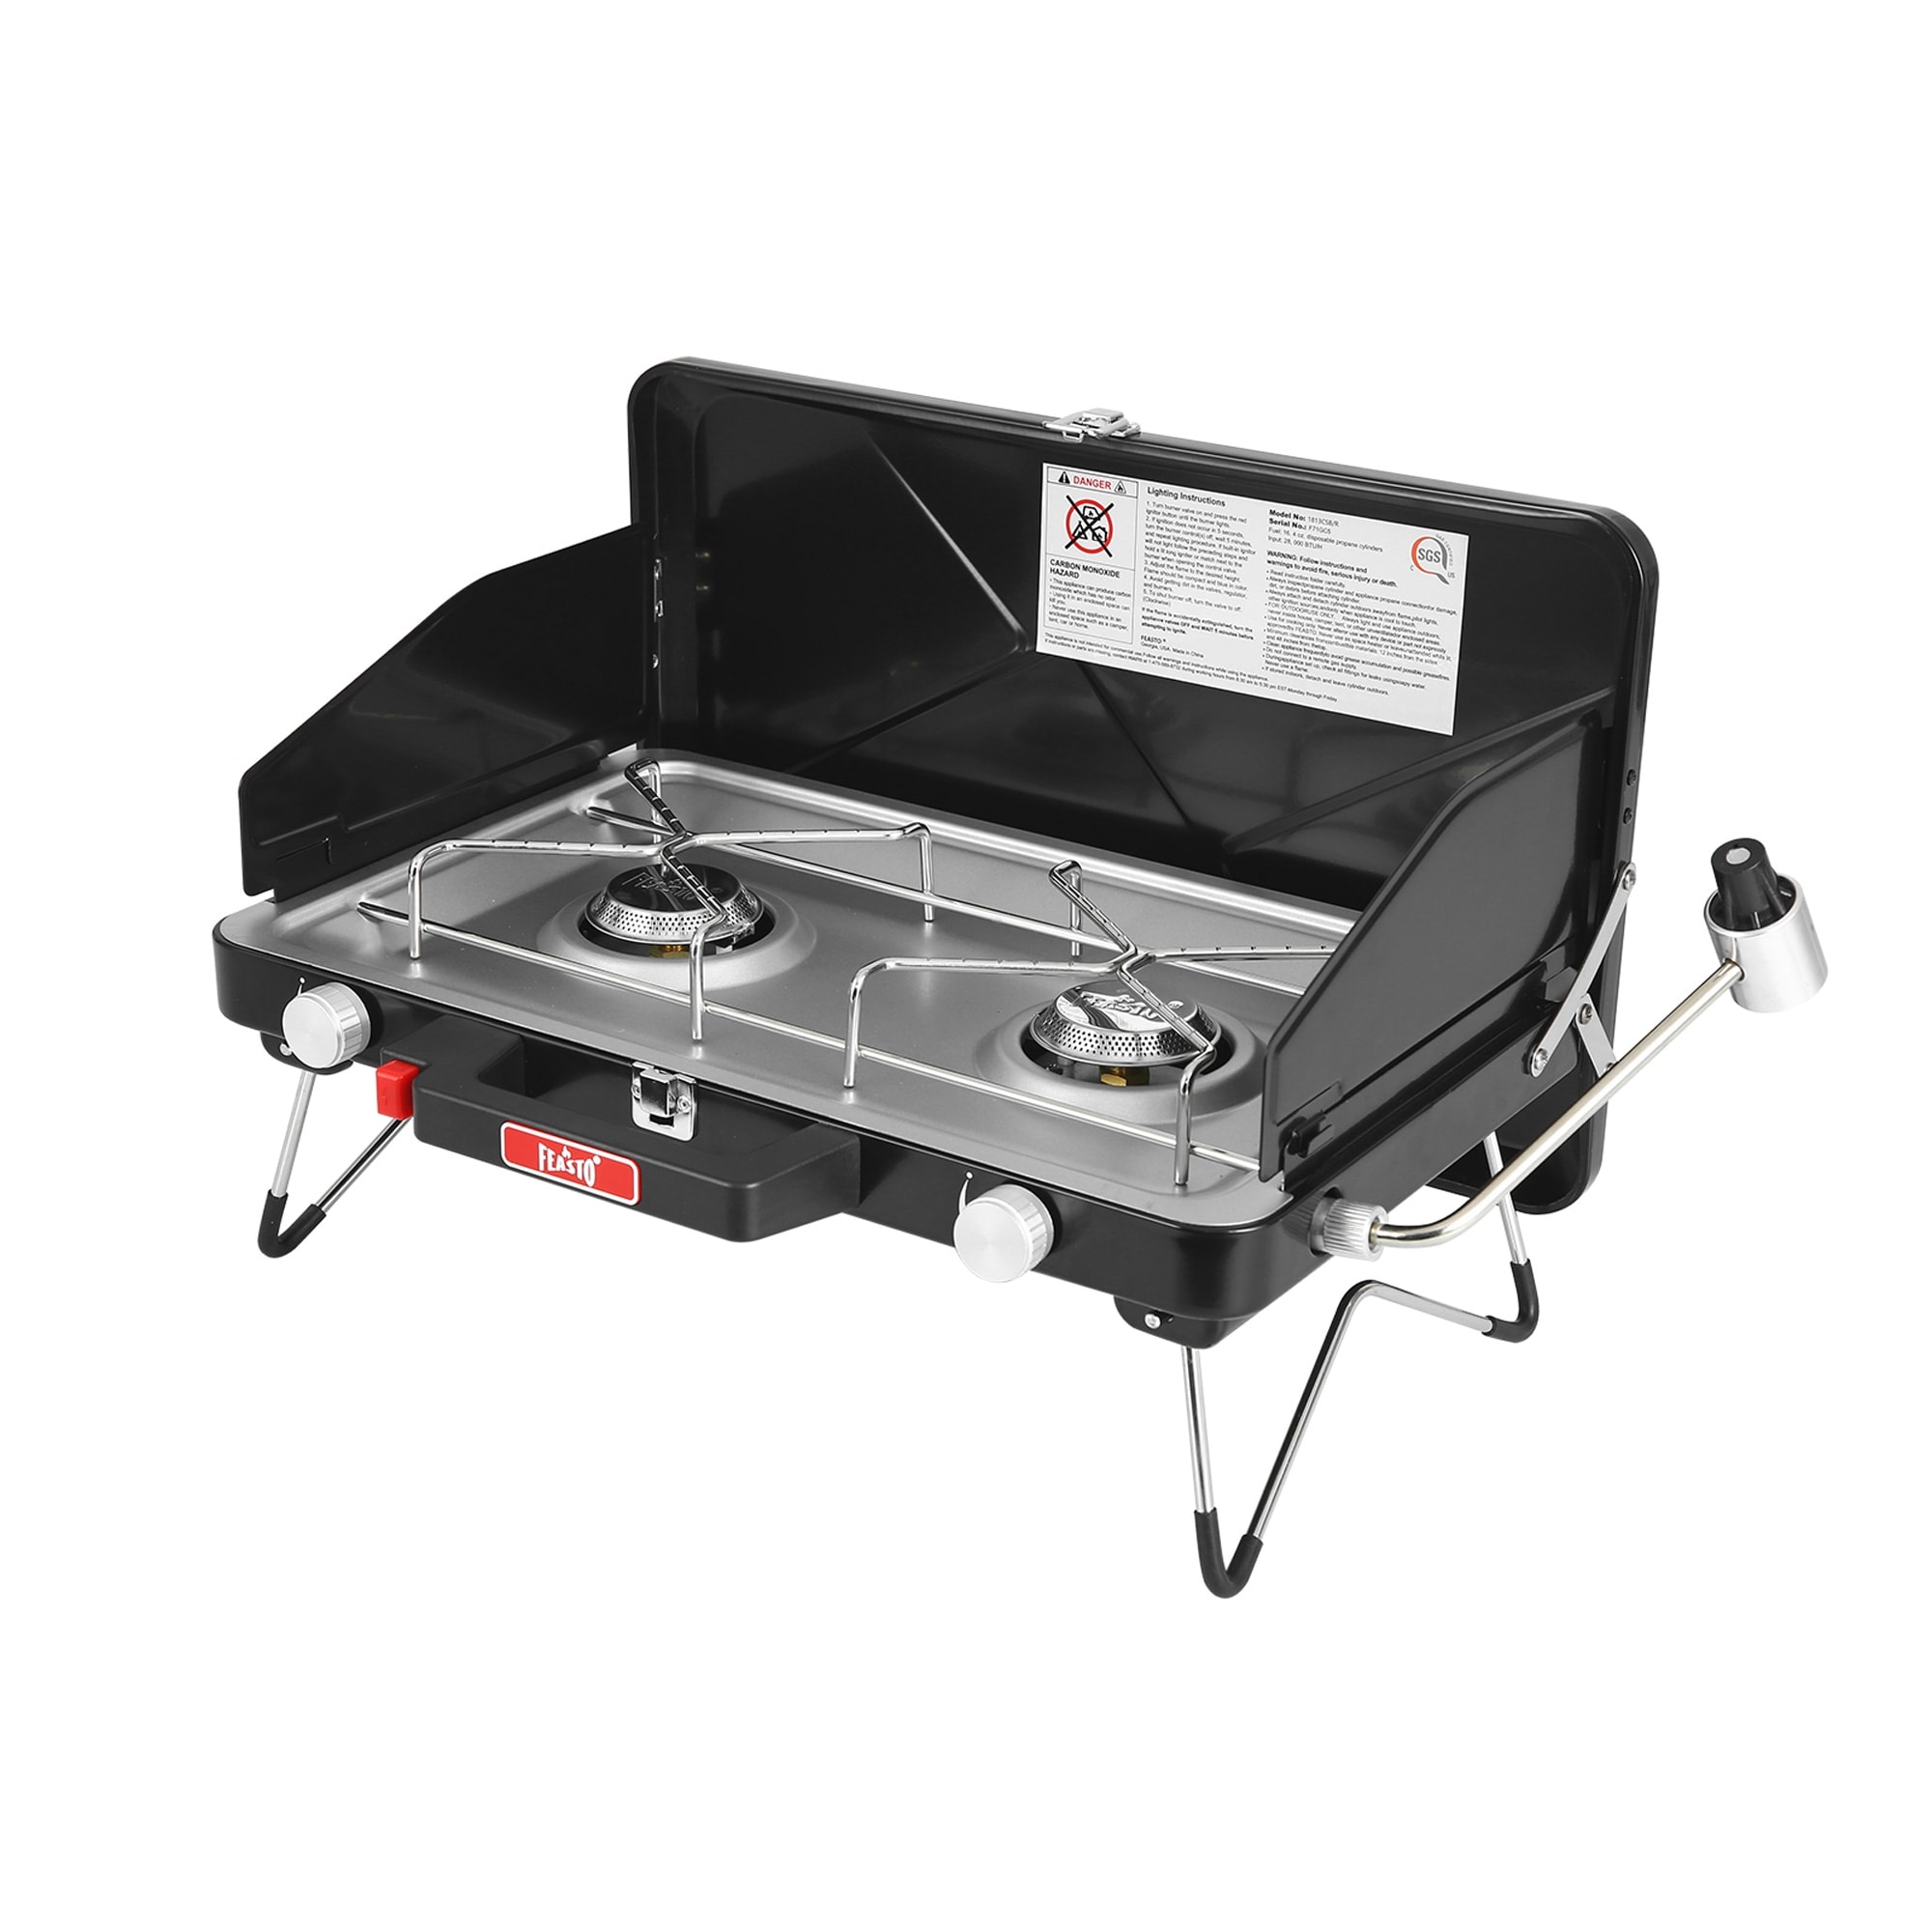 Feasto Propane Portable Camping Stoves With 28000 Btu - N/a